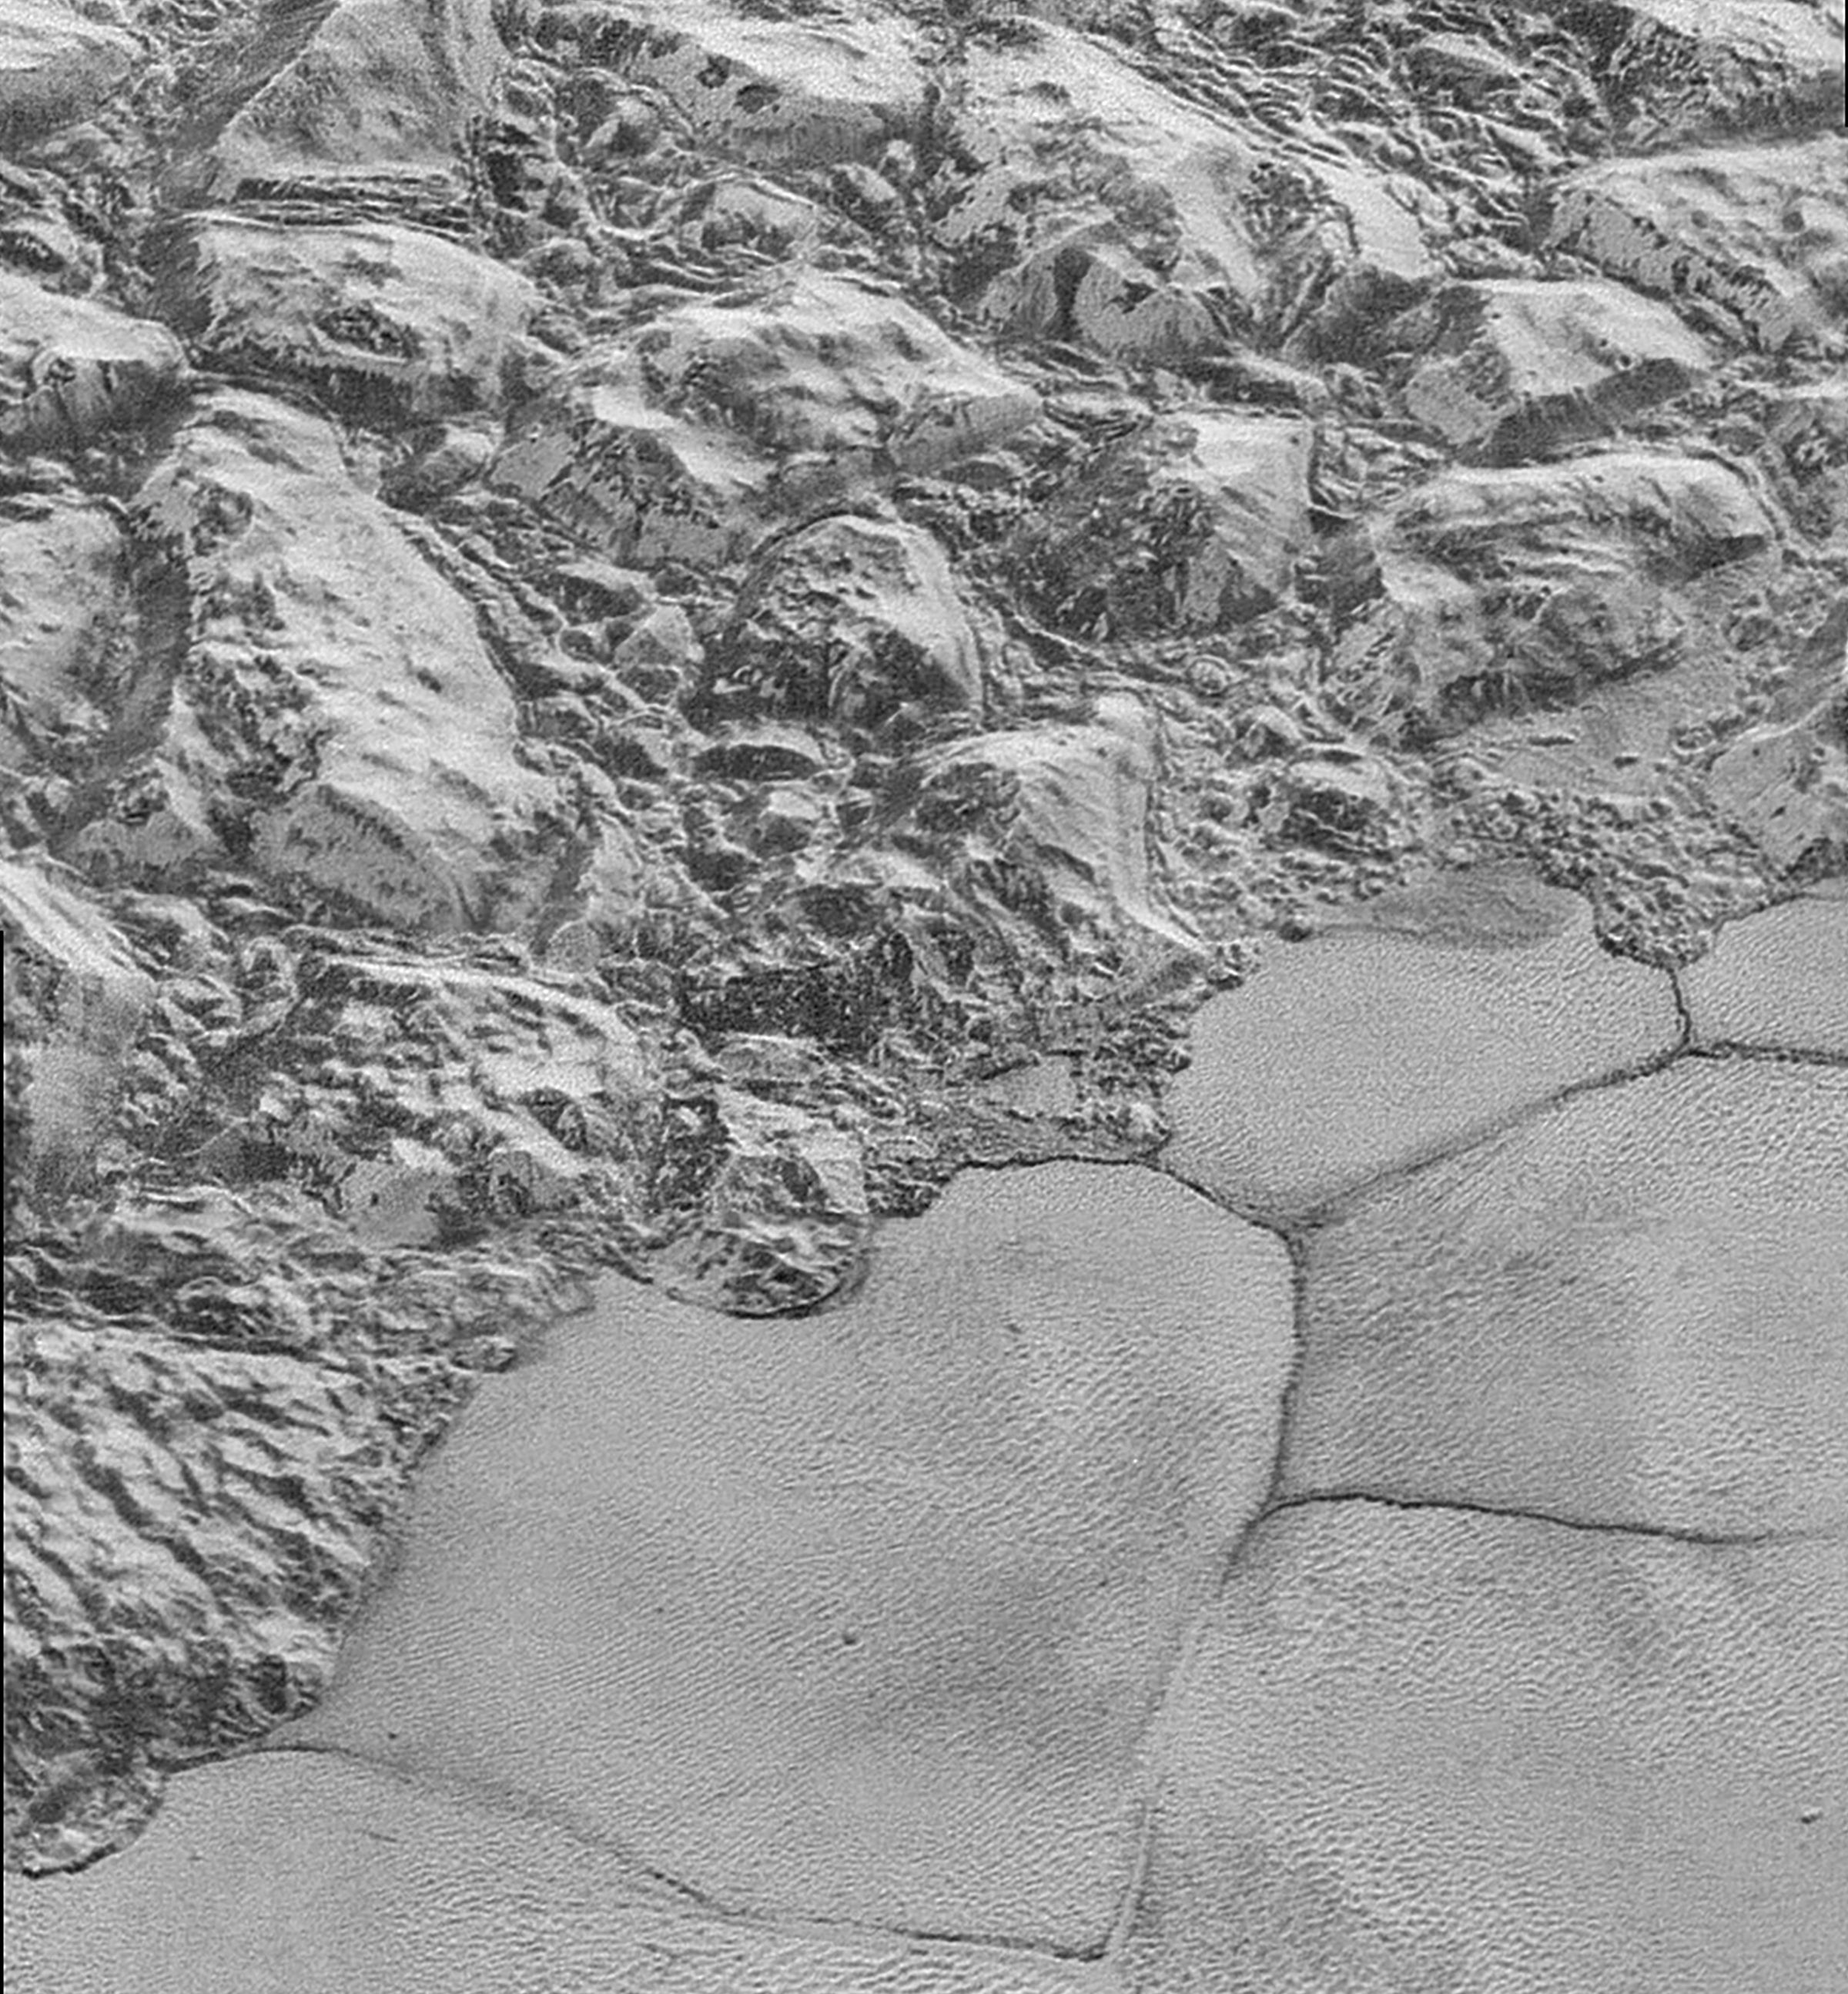 NASA's highest resolution views of Pluto are here